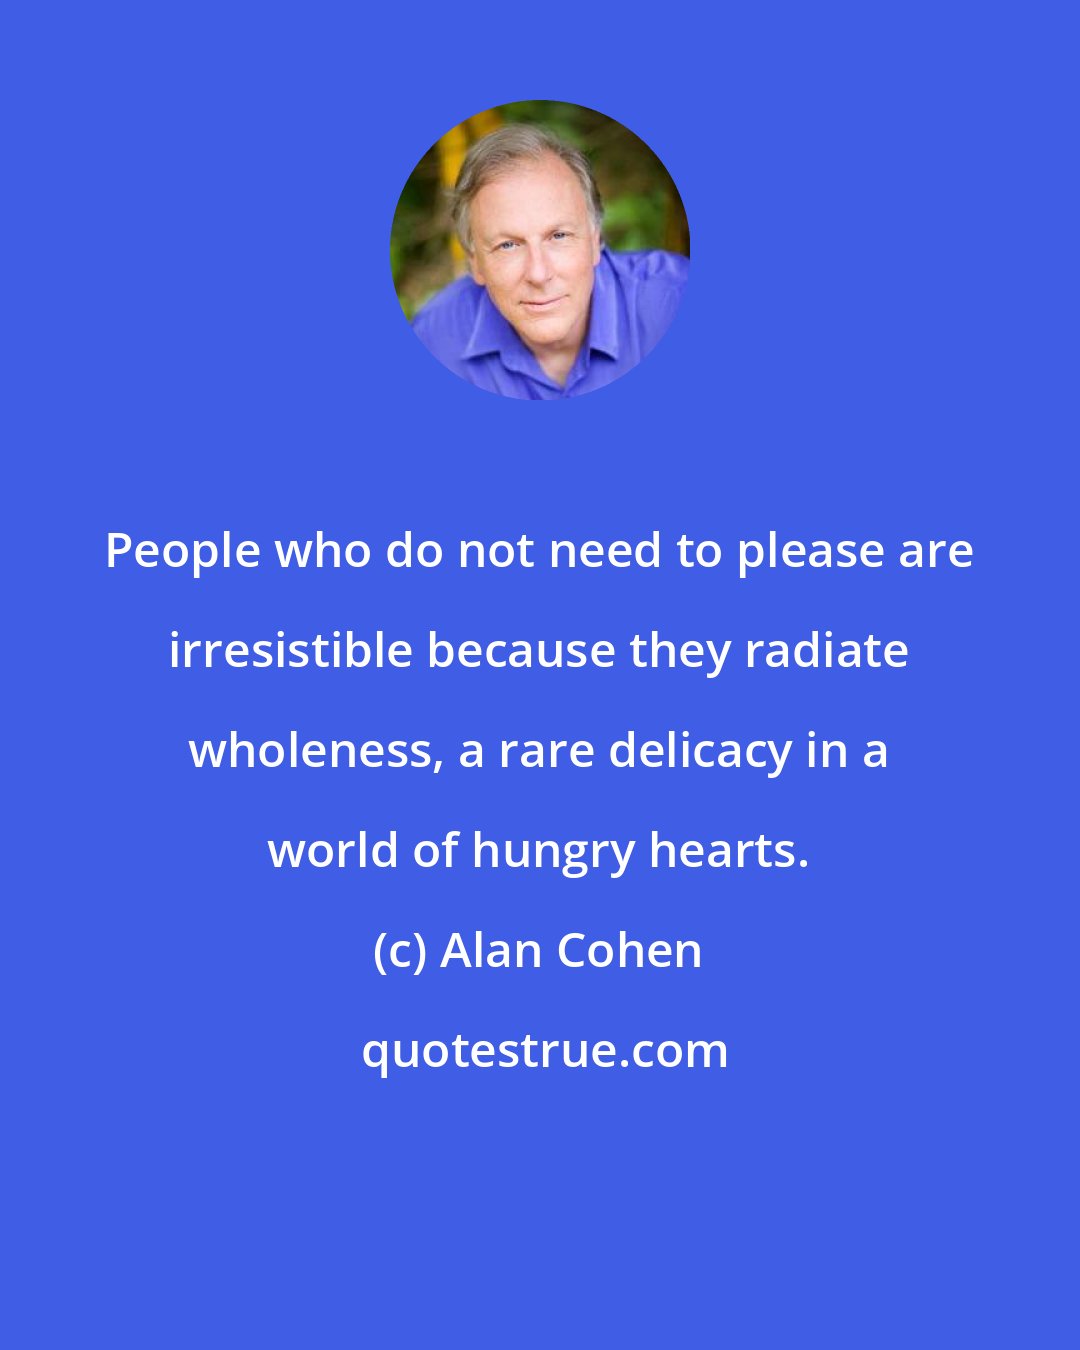 Alan Cohen: People who do not need to please are irresistible because they radiate wholeness, a rare delicacy in a world of hungry hearts.